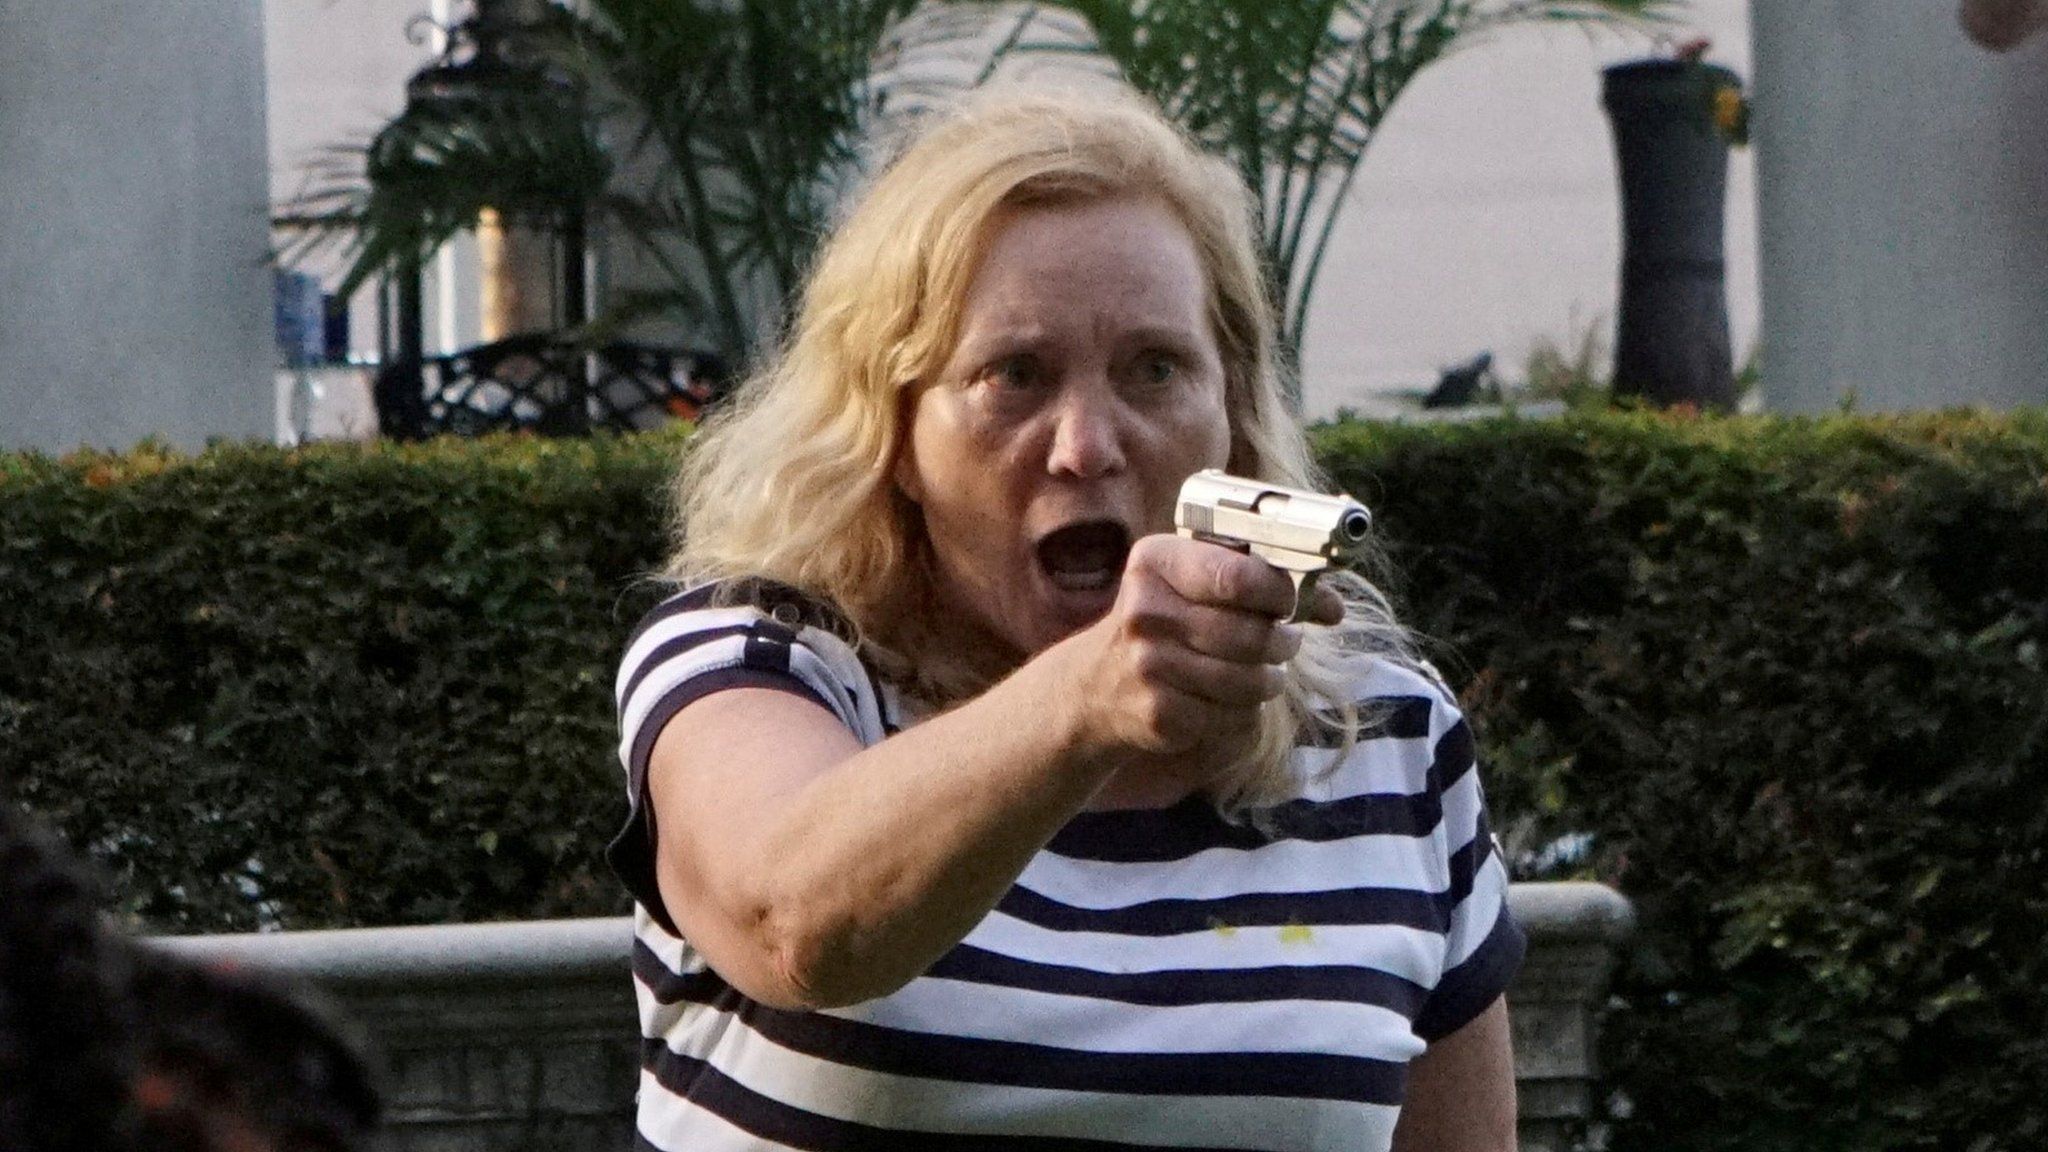 Patricia McCloskey aiming a handgun at protesters outside her home